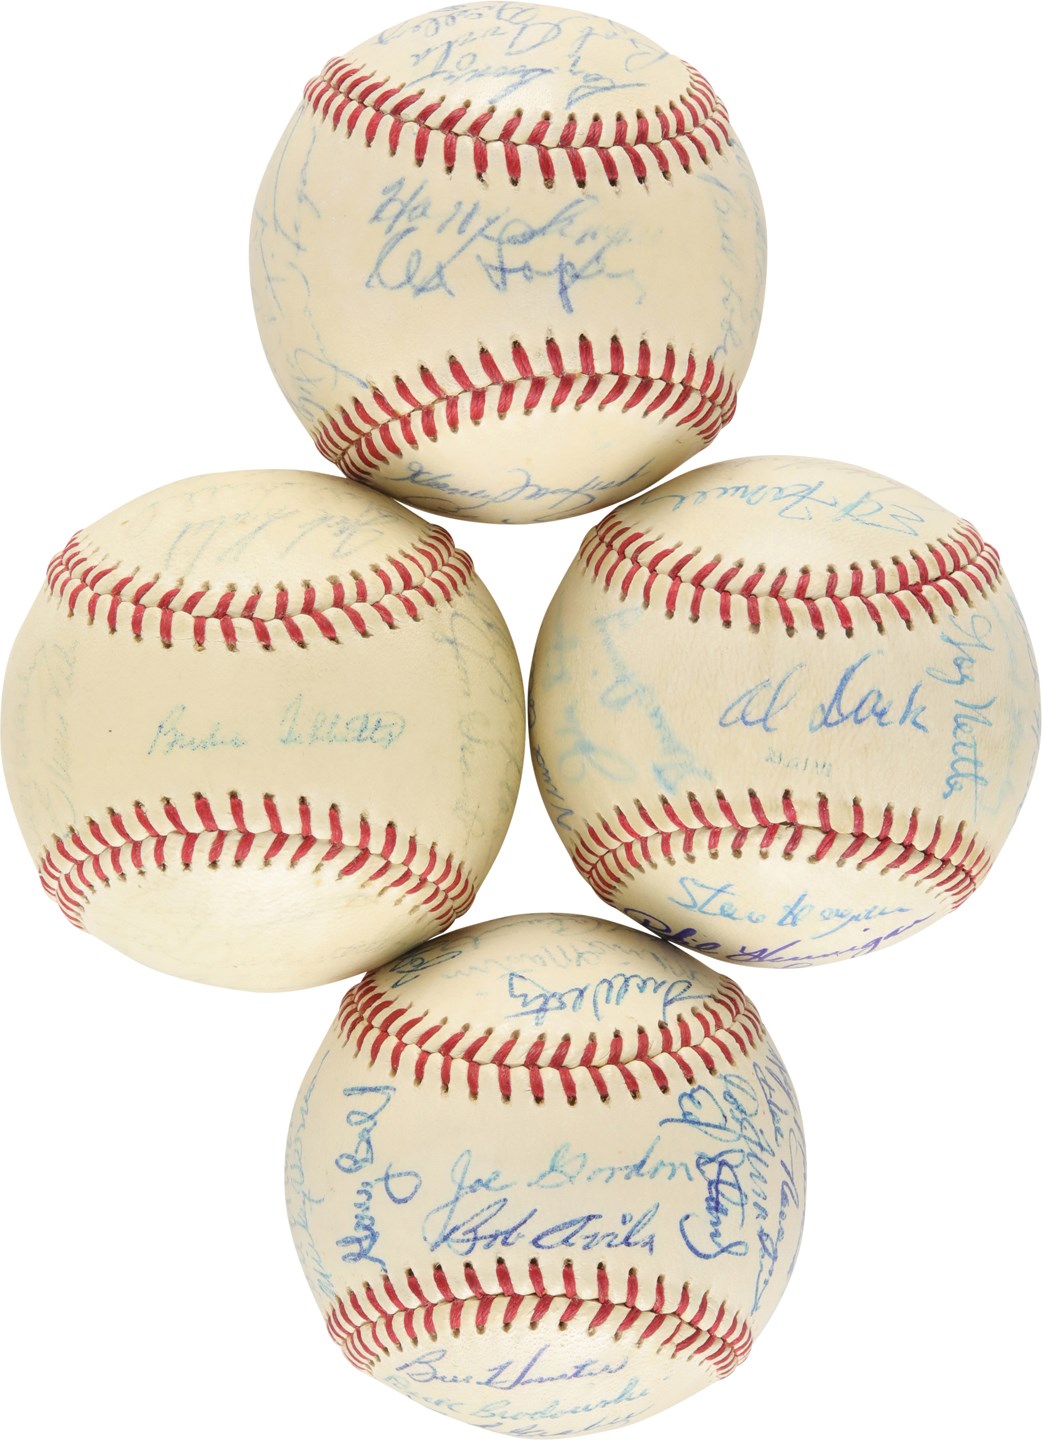 1952-1971 Cleveland Indians Team-Signed Ball Collection (4)